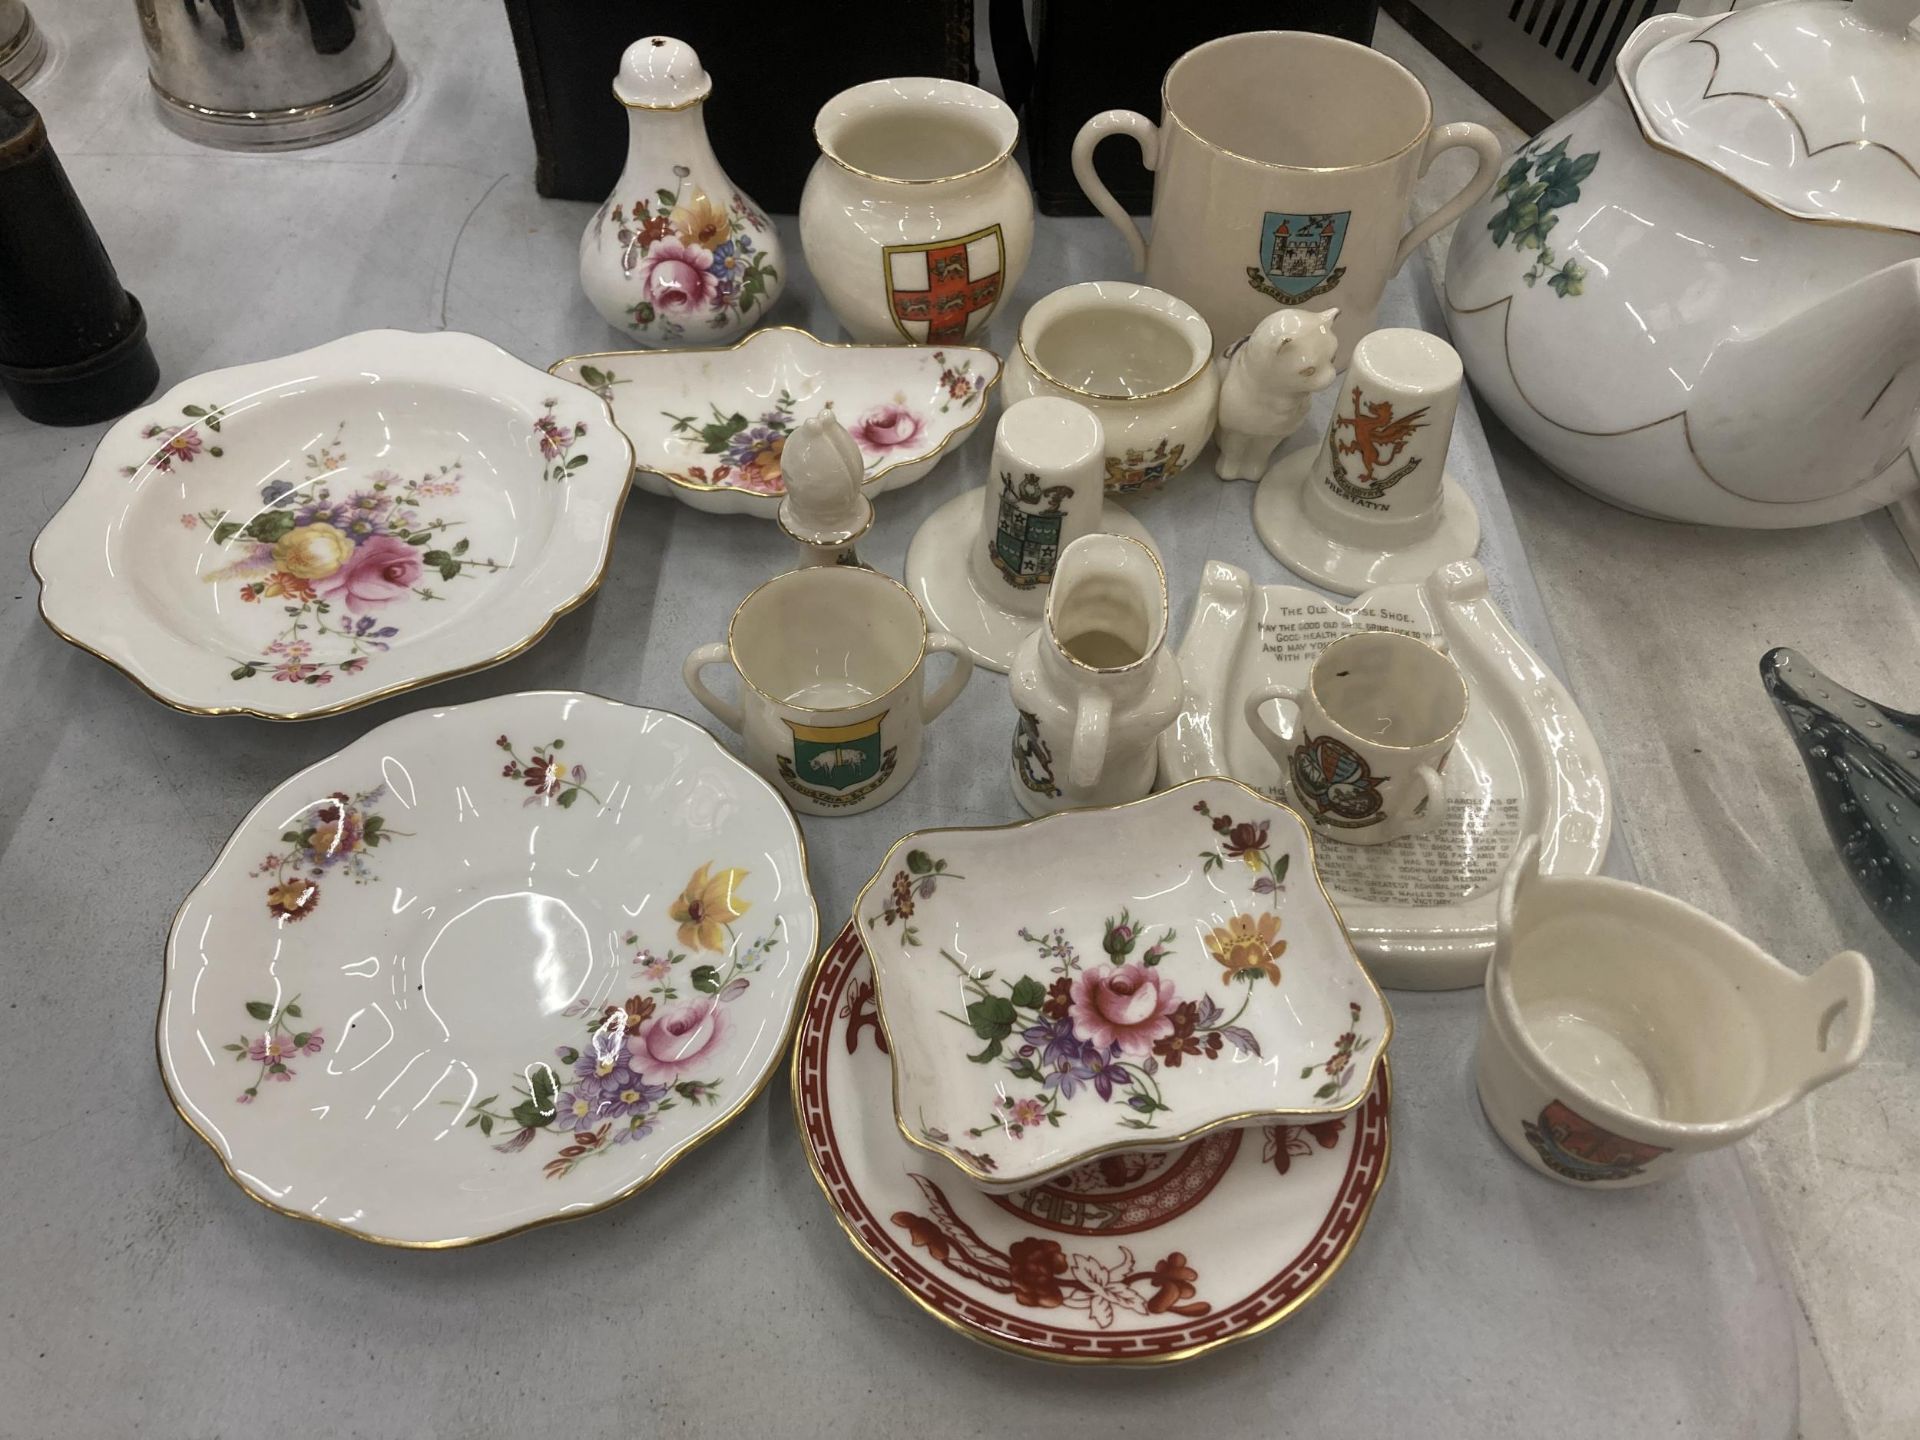 A QUANTITY OF ROYAL CROWN DERBY 'DERBY POSIES' TO INCLUDE PIN TRAYS, A BOWL, CRUET, ETC PLUS A